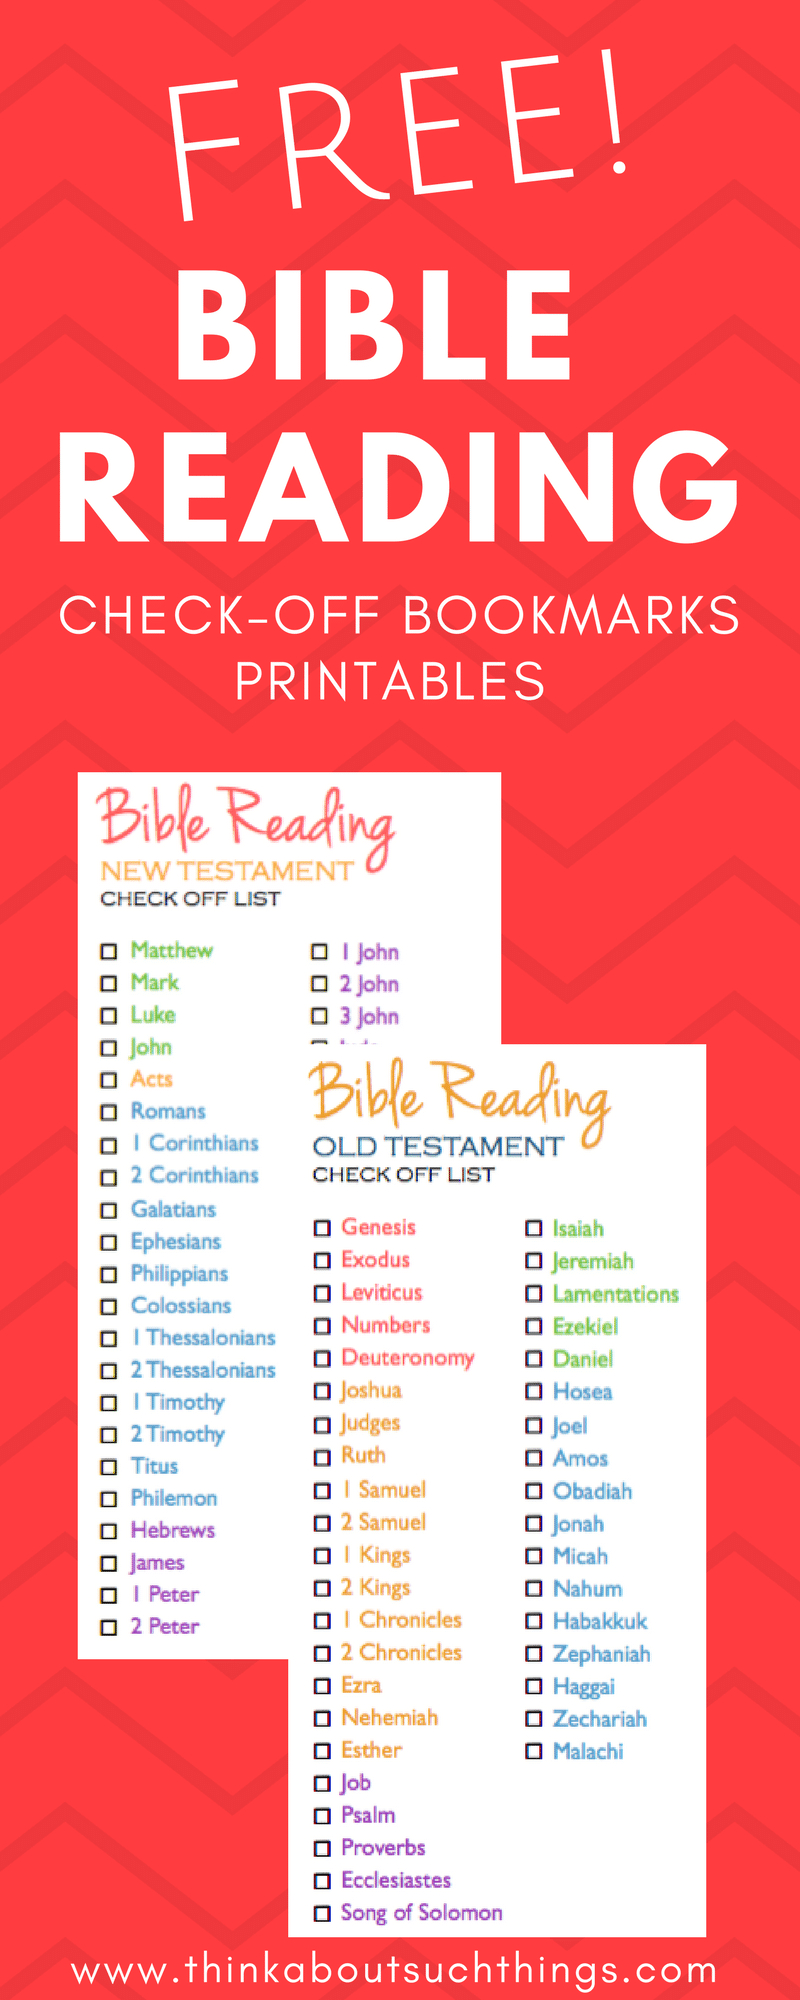 Free Bible Reading Check Off Bookmark Printable | The Best Of Think - Books Of The Bible Bookmark Printable Free